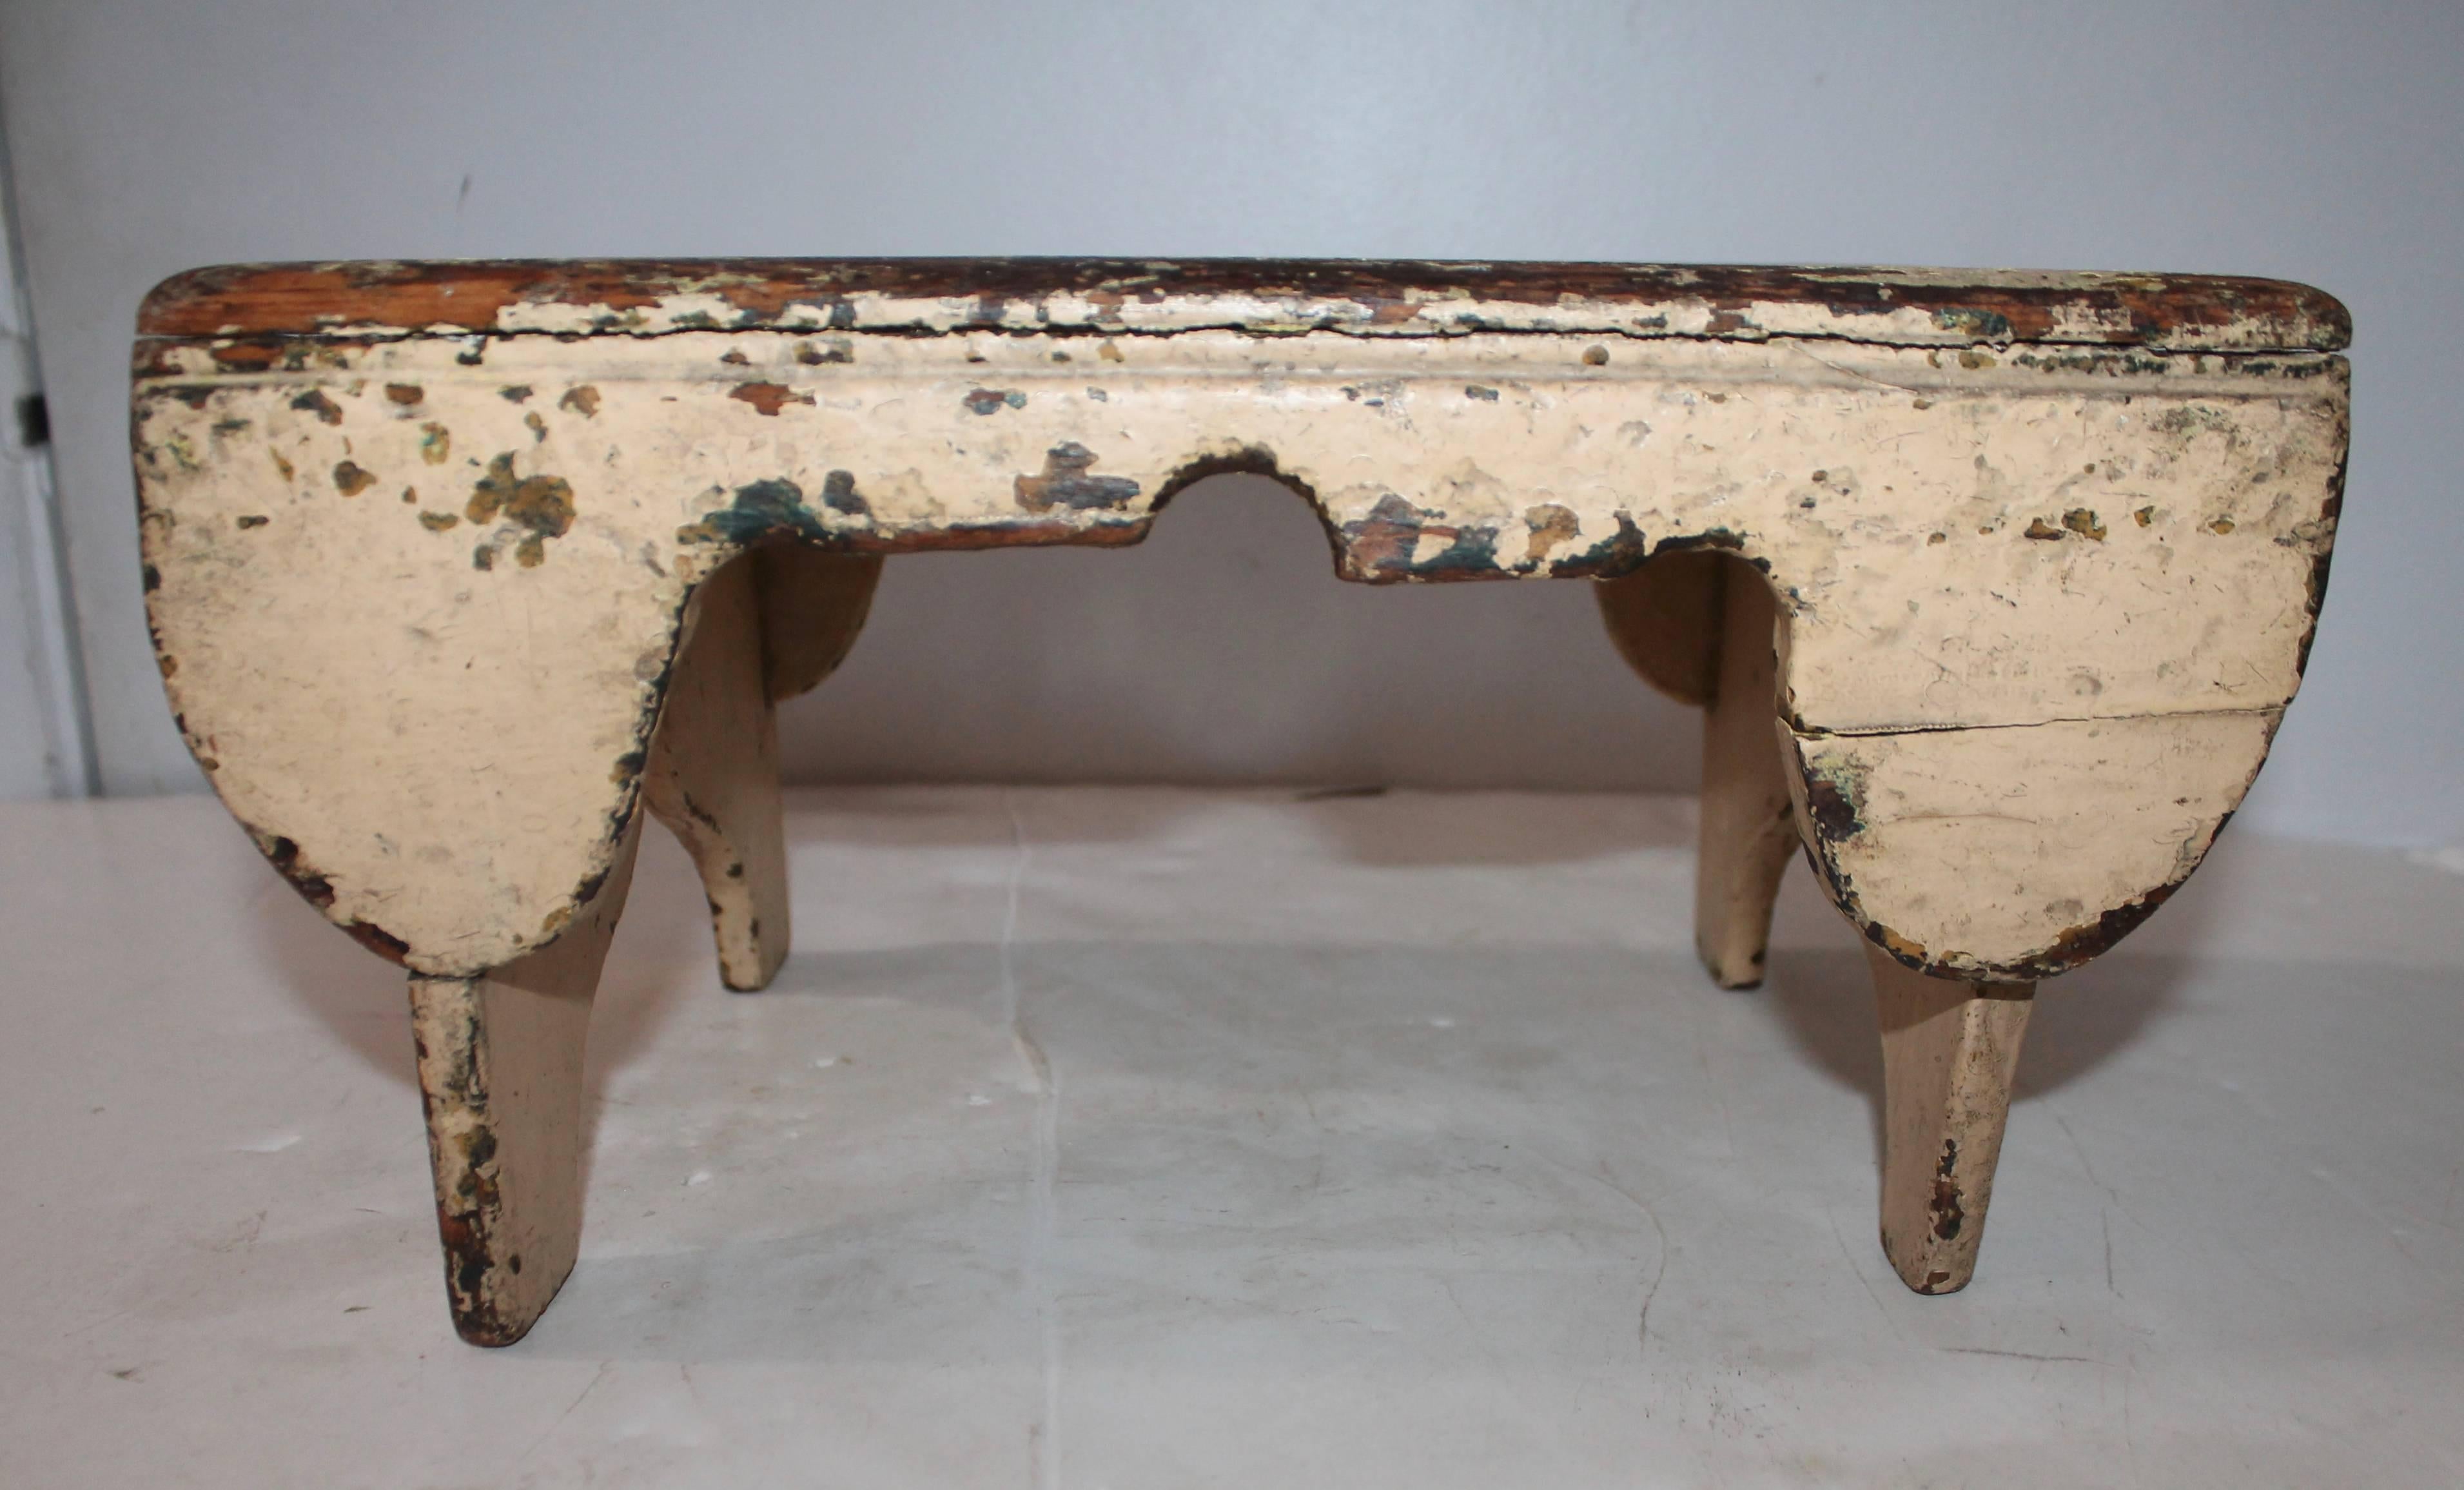 Painted Early 19th Century Bench in Original Putty Paint